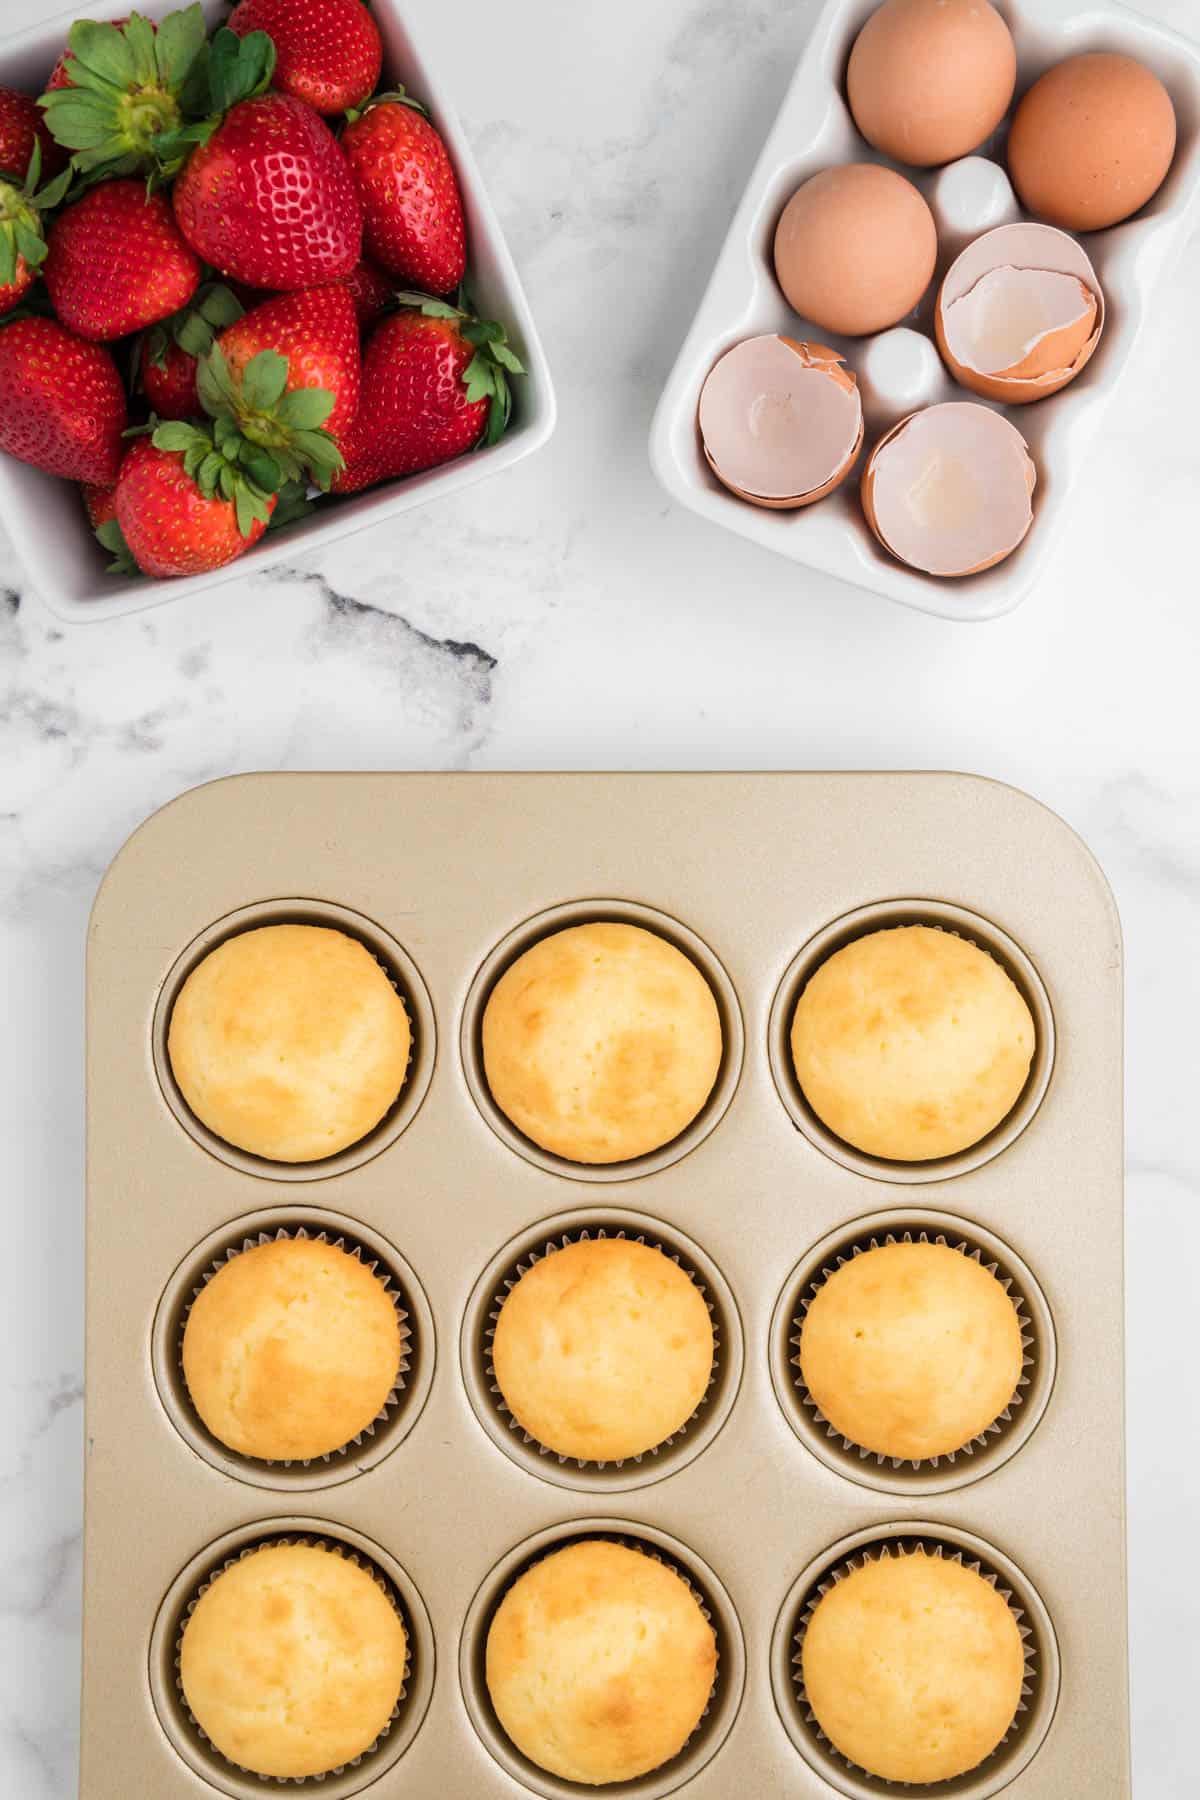 Cupcakes made from white cake mix baked in a muffin tin.